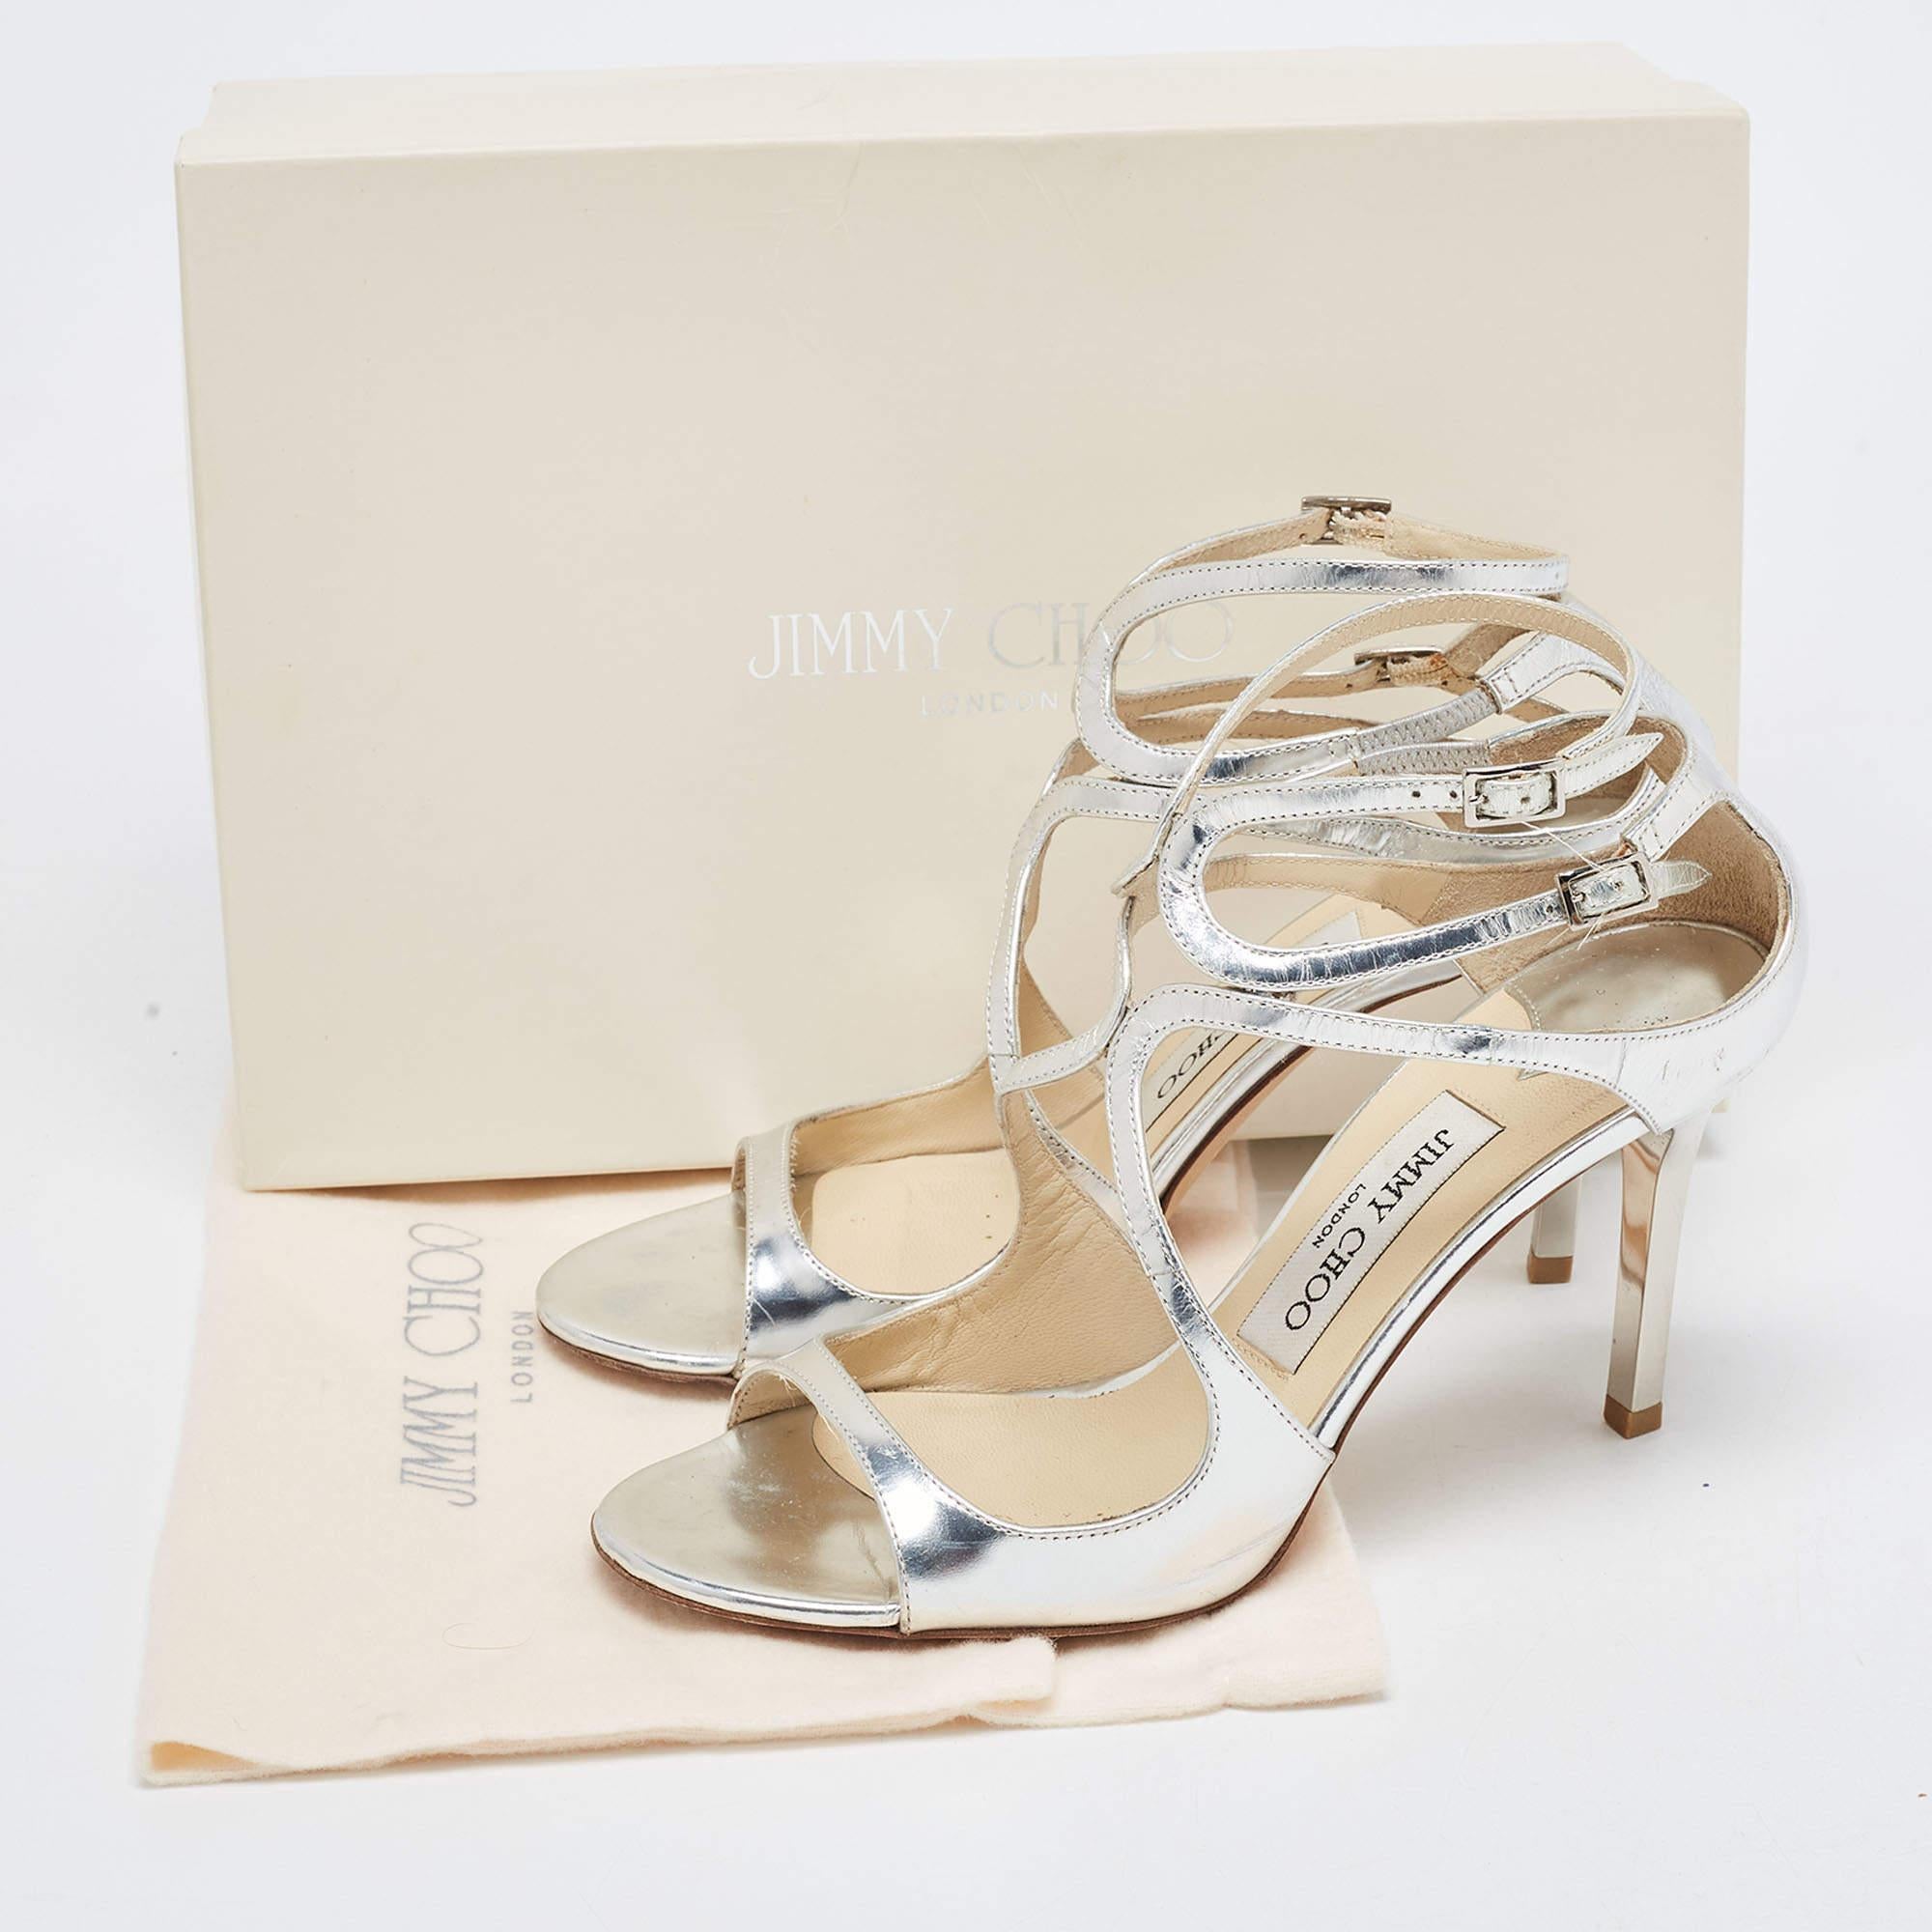 Jimmy Choo Silver Leather Ivette Strappy Sandals Size 36.5 3